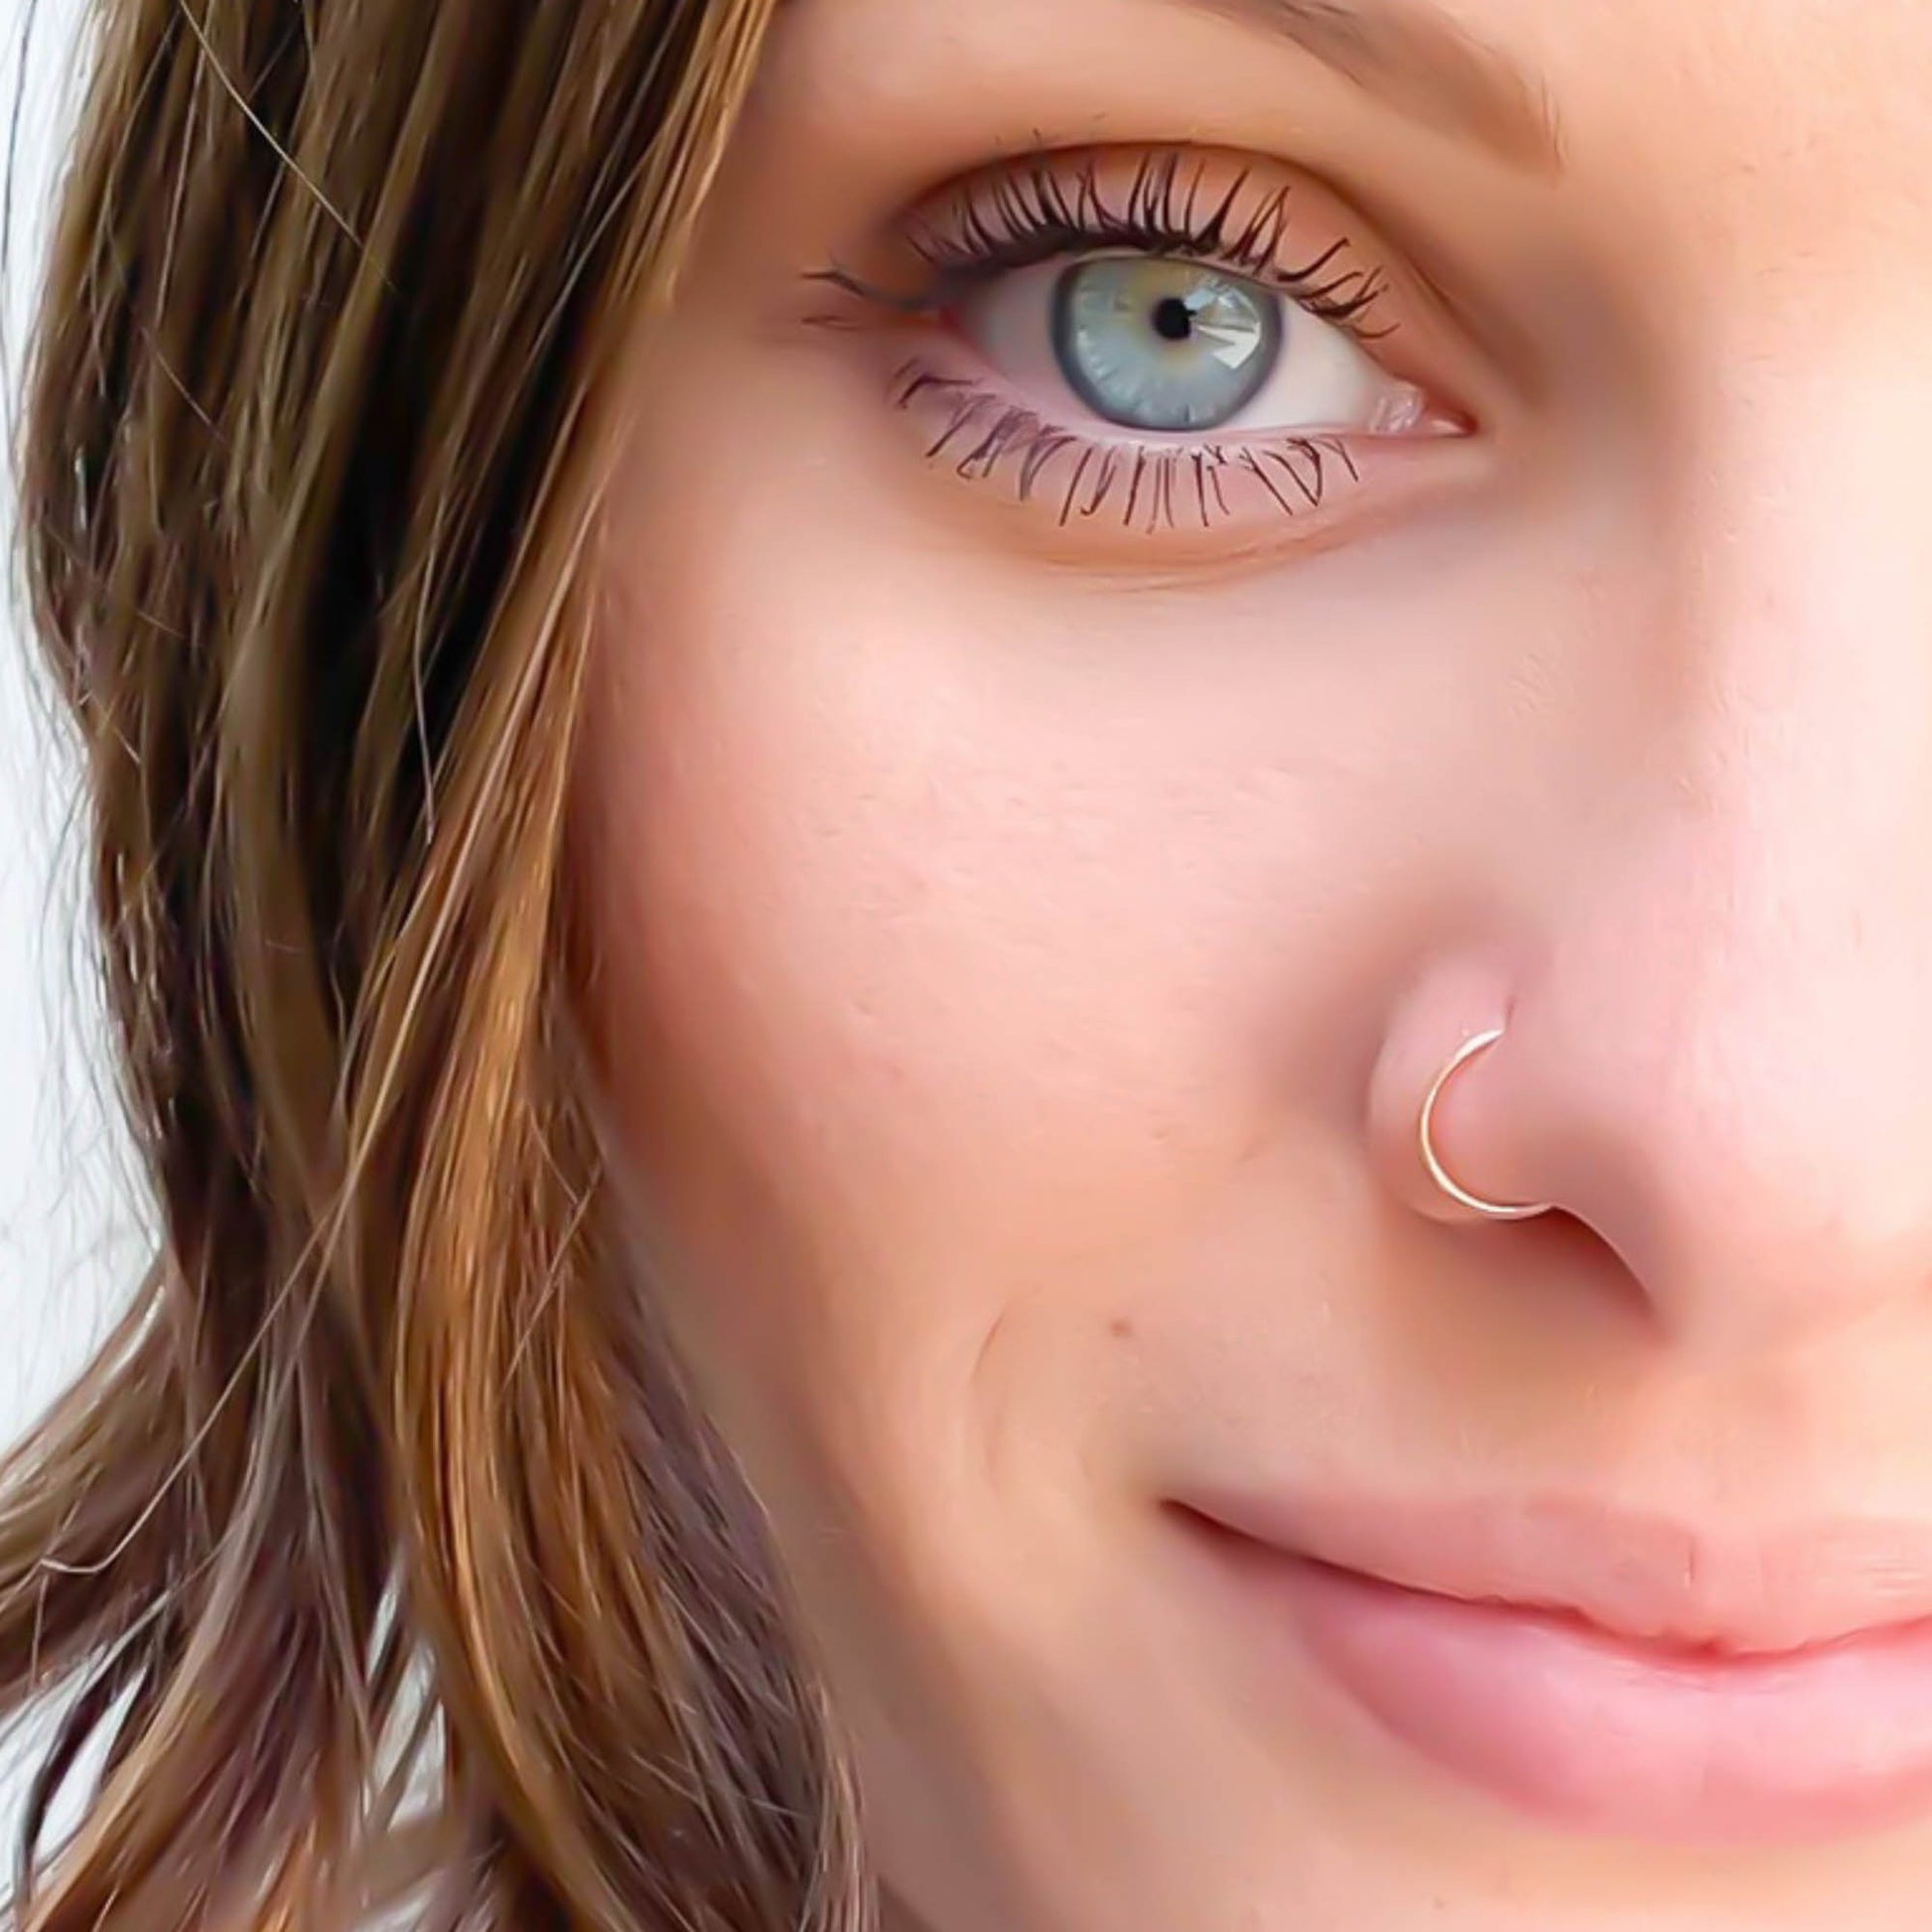 Faux Nose Ring - Fake Nose Hoop Ring - Silver or Gold - Clip On